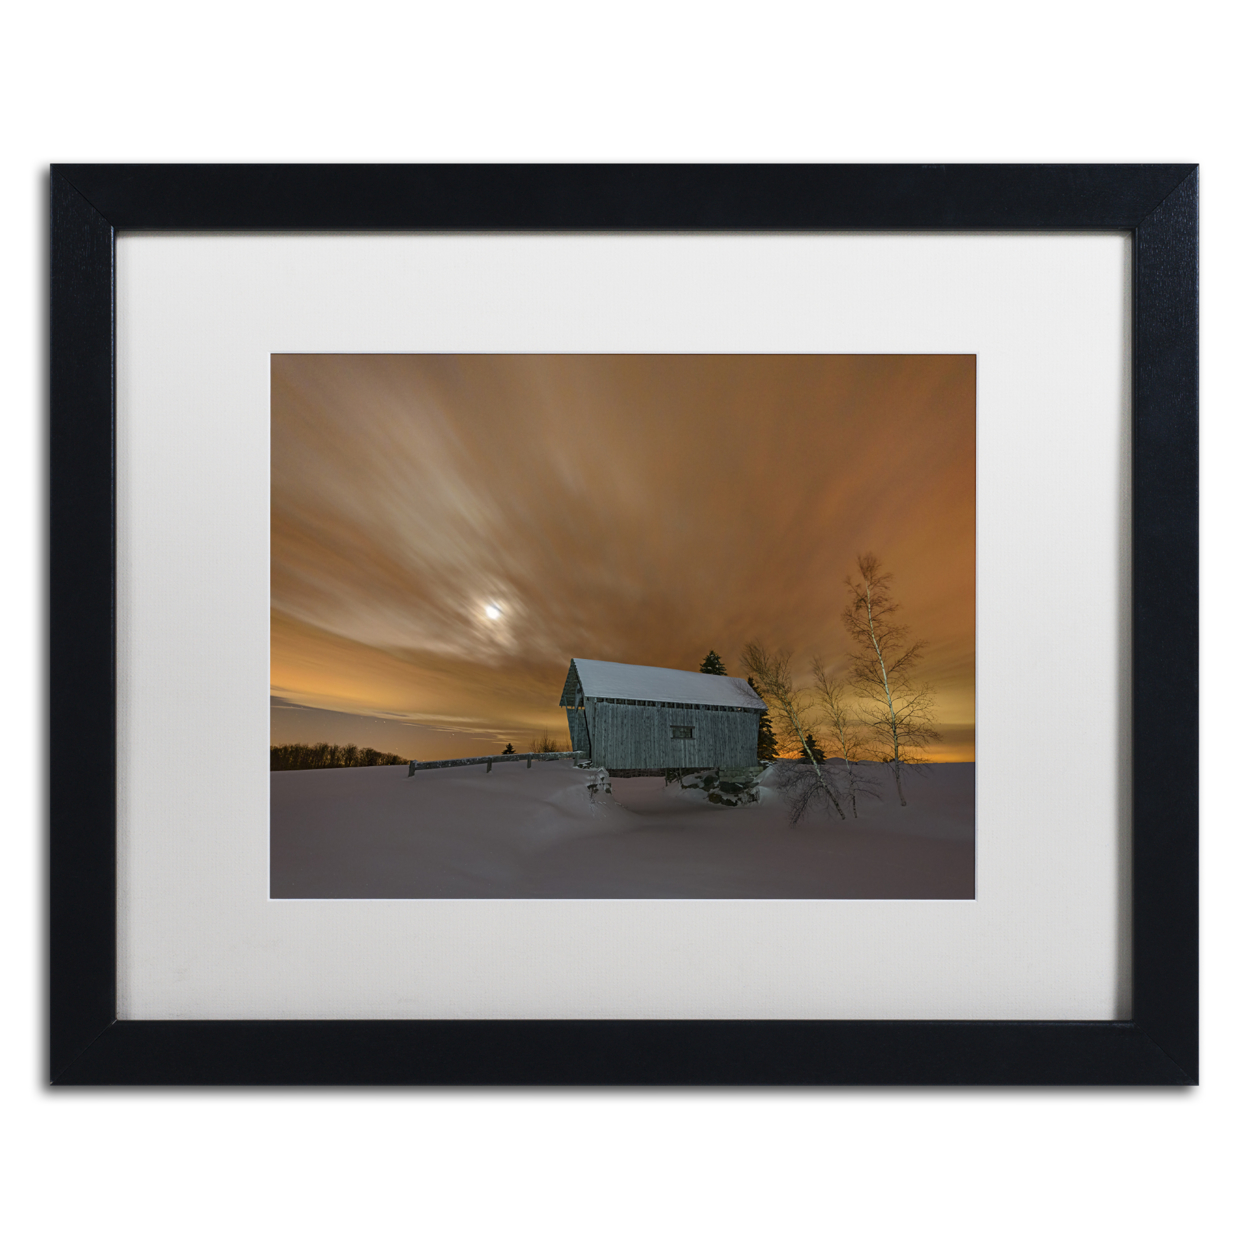 Michael Blanchette Photography 'Winter Glow' Black Wooden Framed Art 18 X 22 Inches